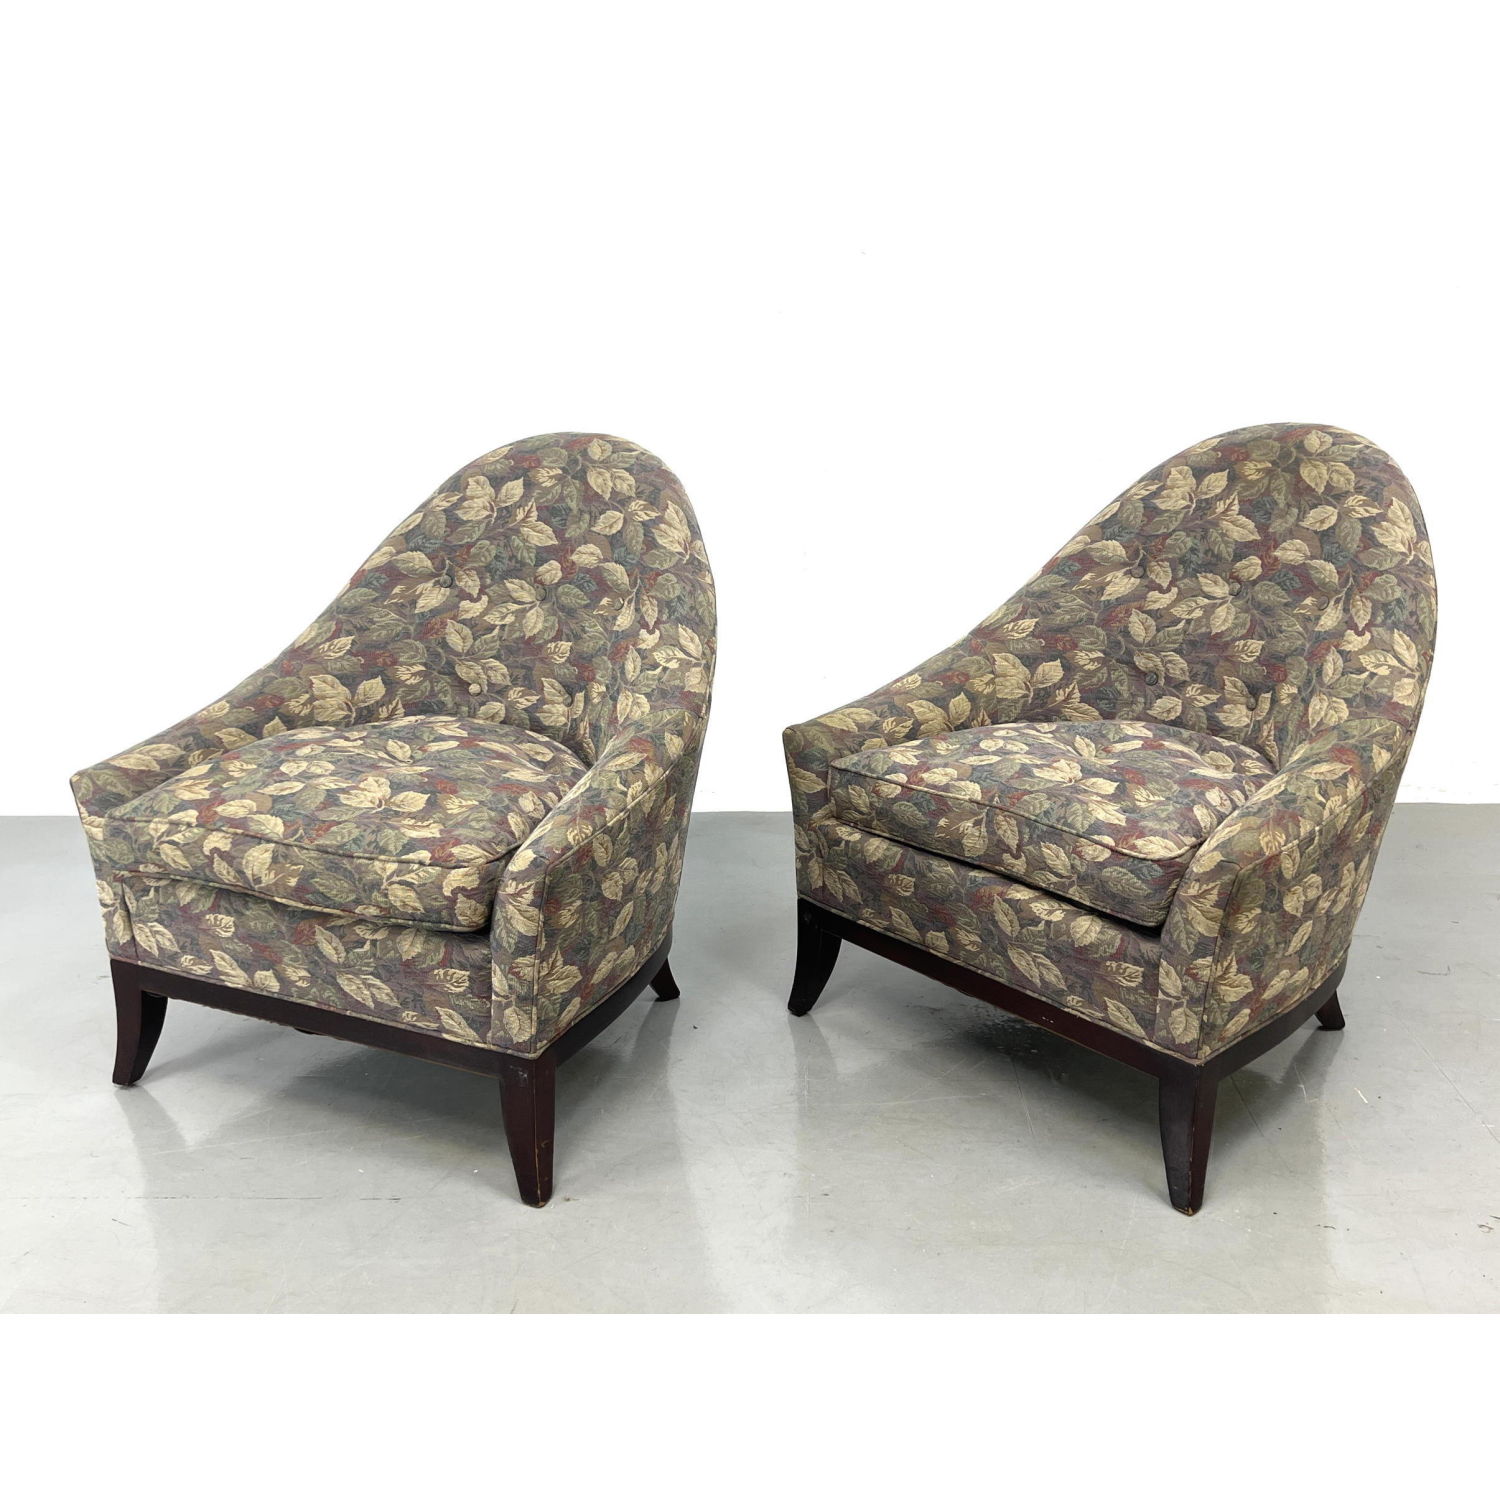 Pr HICKORY CHAIR Arched Back Lounge 2b90a3